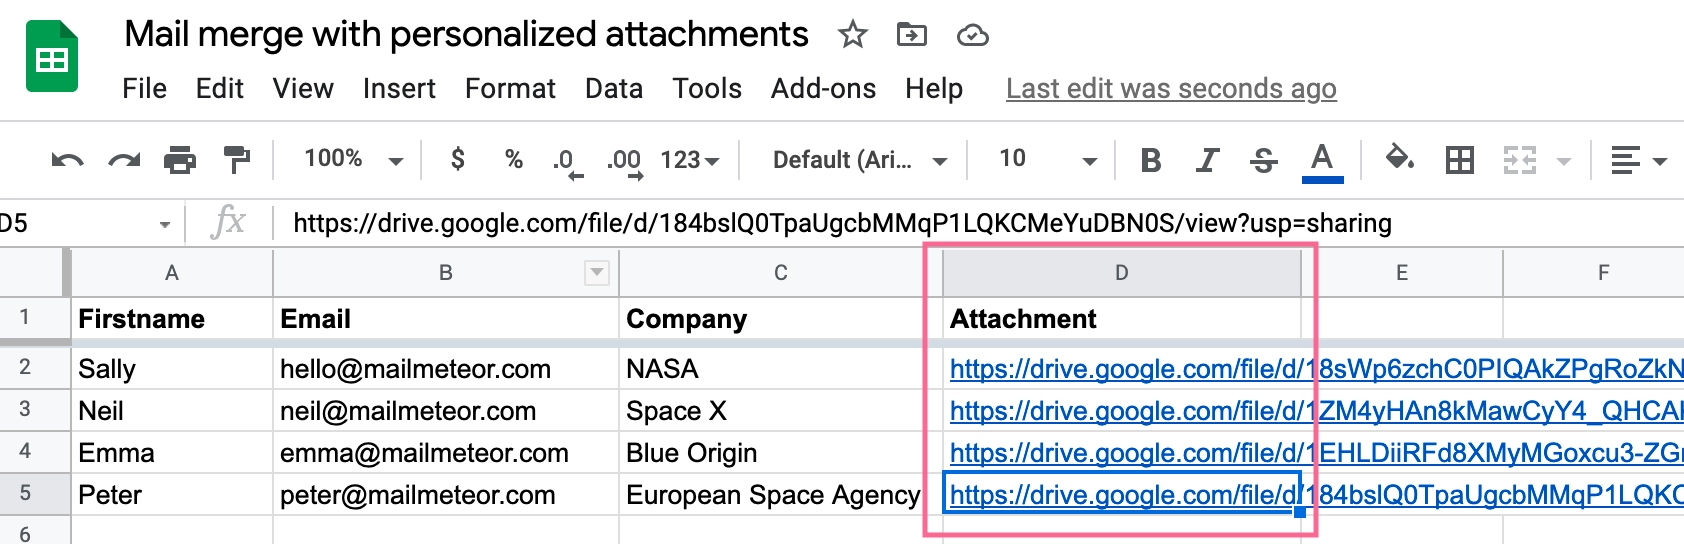 Add individual attachments to a mail merge in Gmail